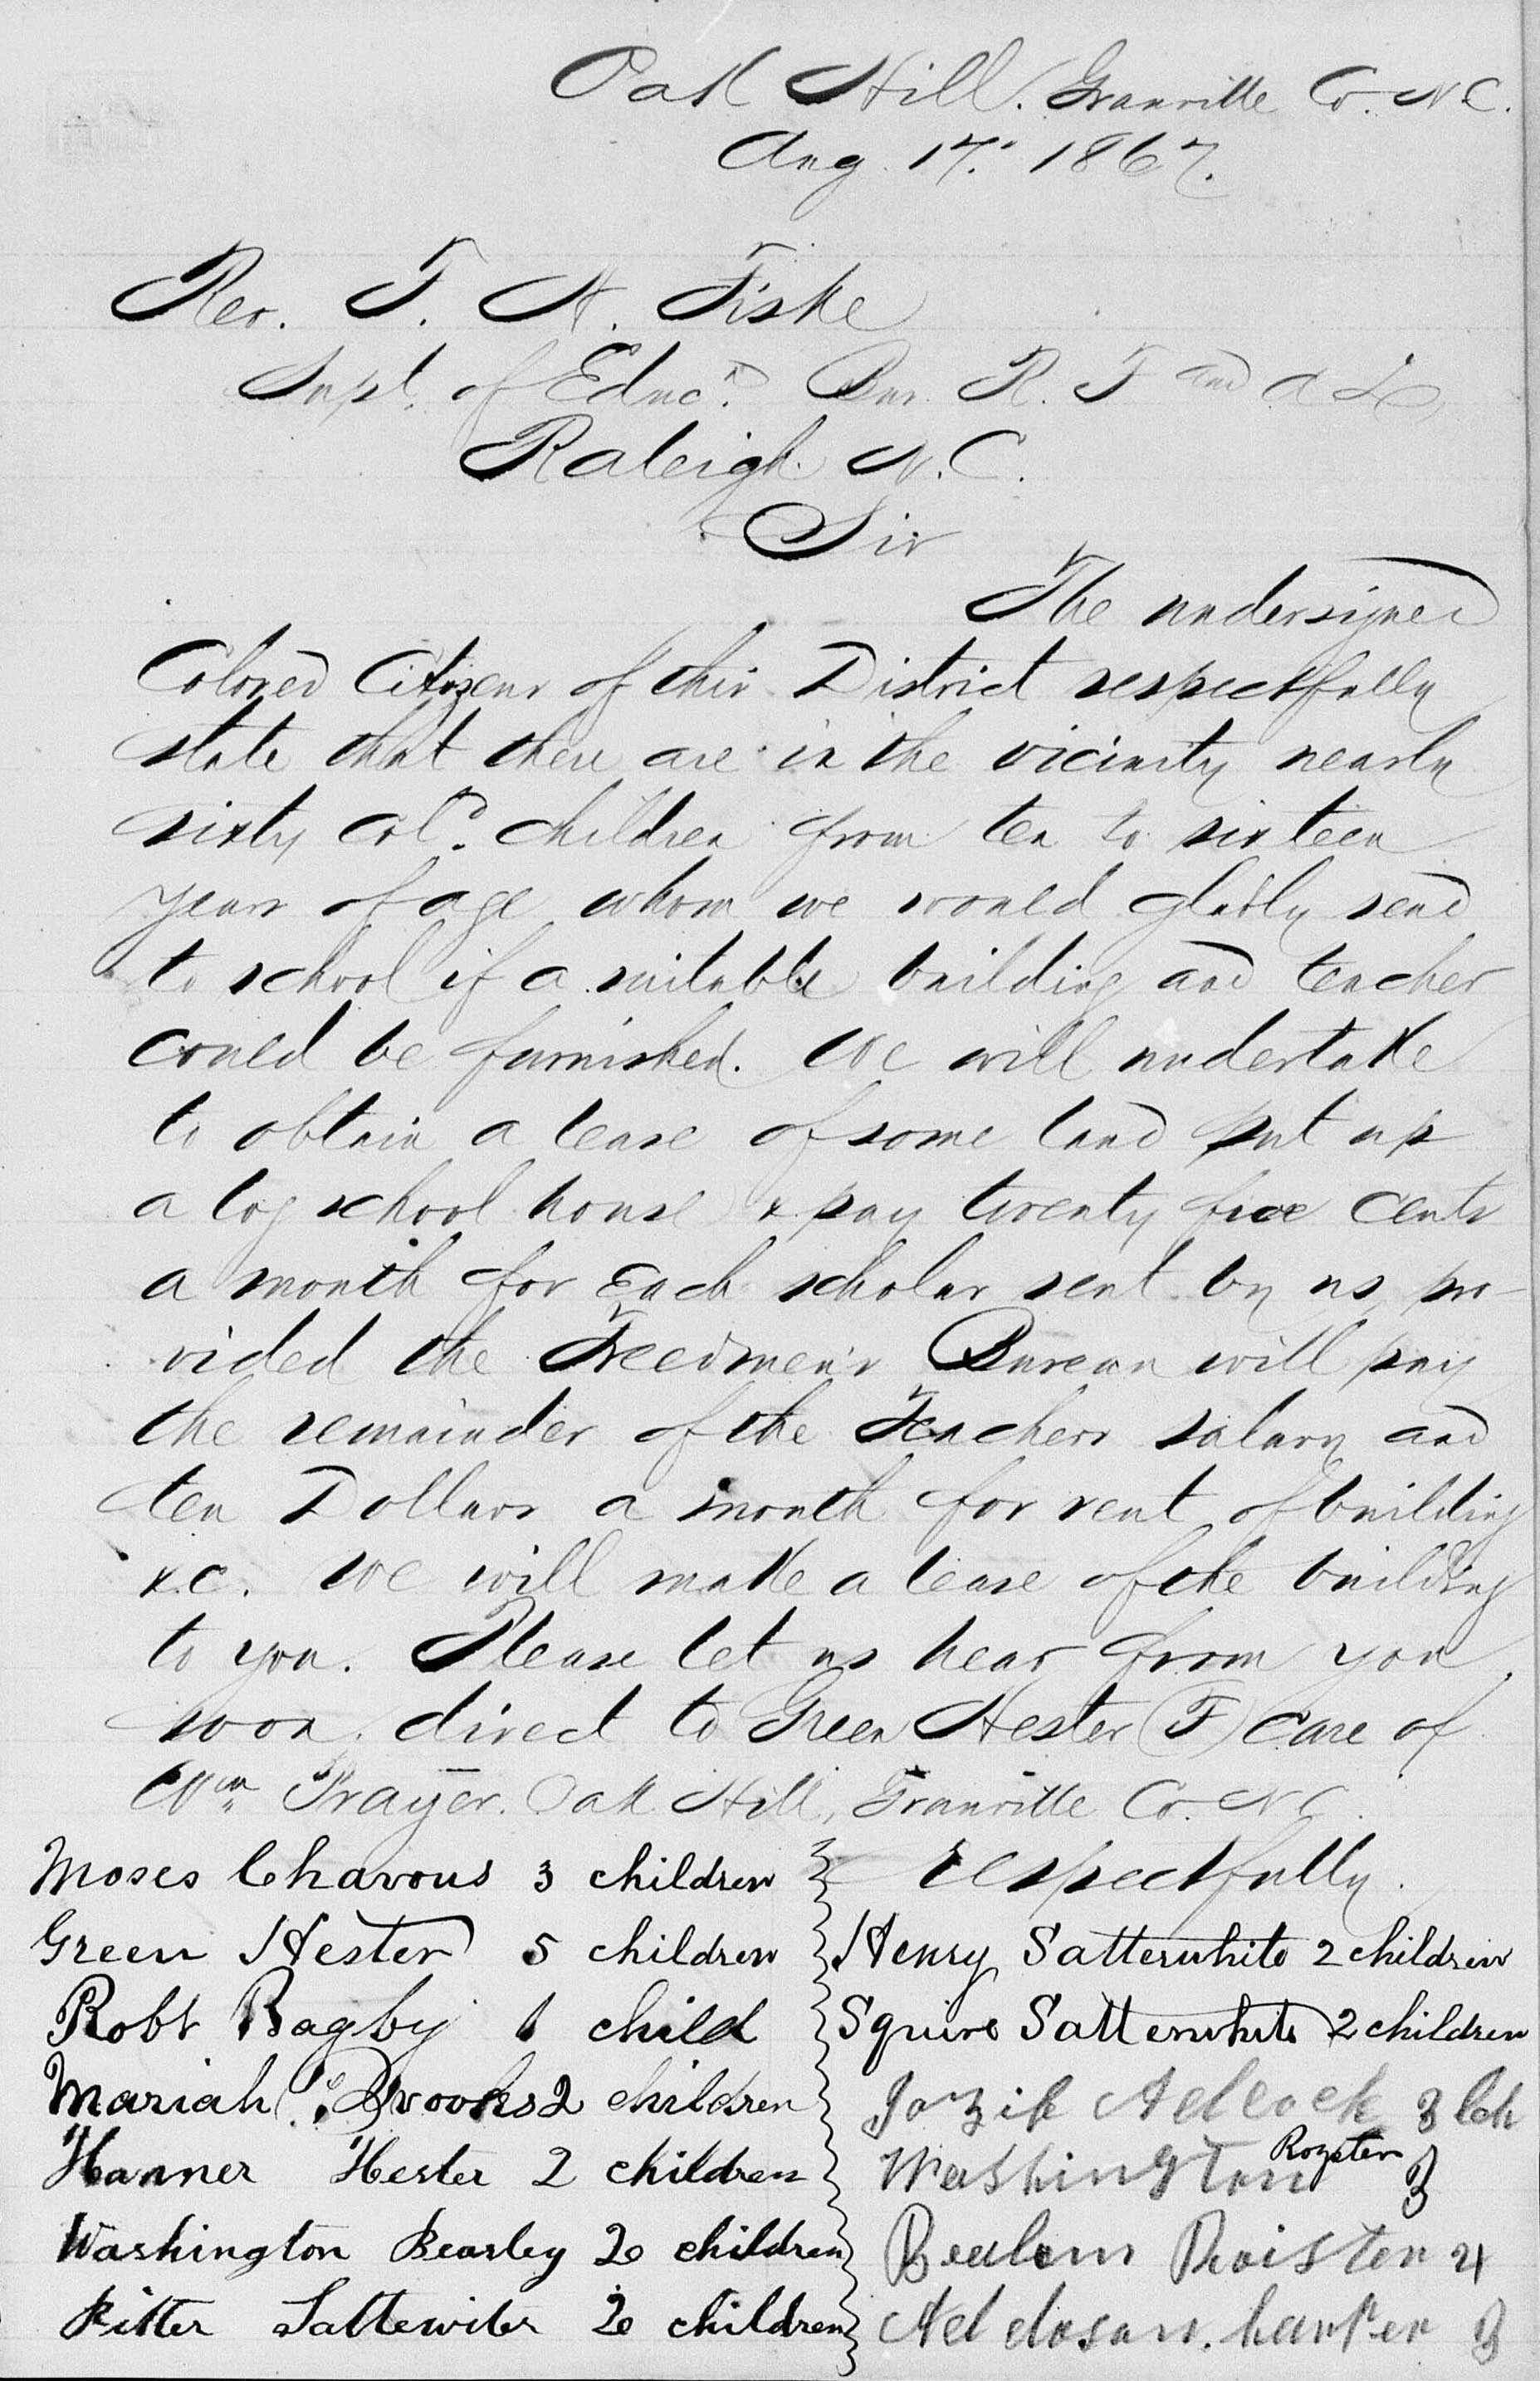 A handwritten petition sent to the Freedmen’s Bureau. The cursive writing fills the page and has people's names listed at the bottom.